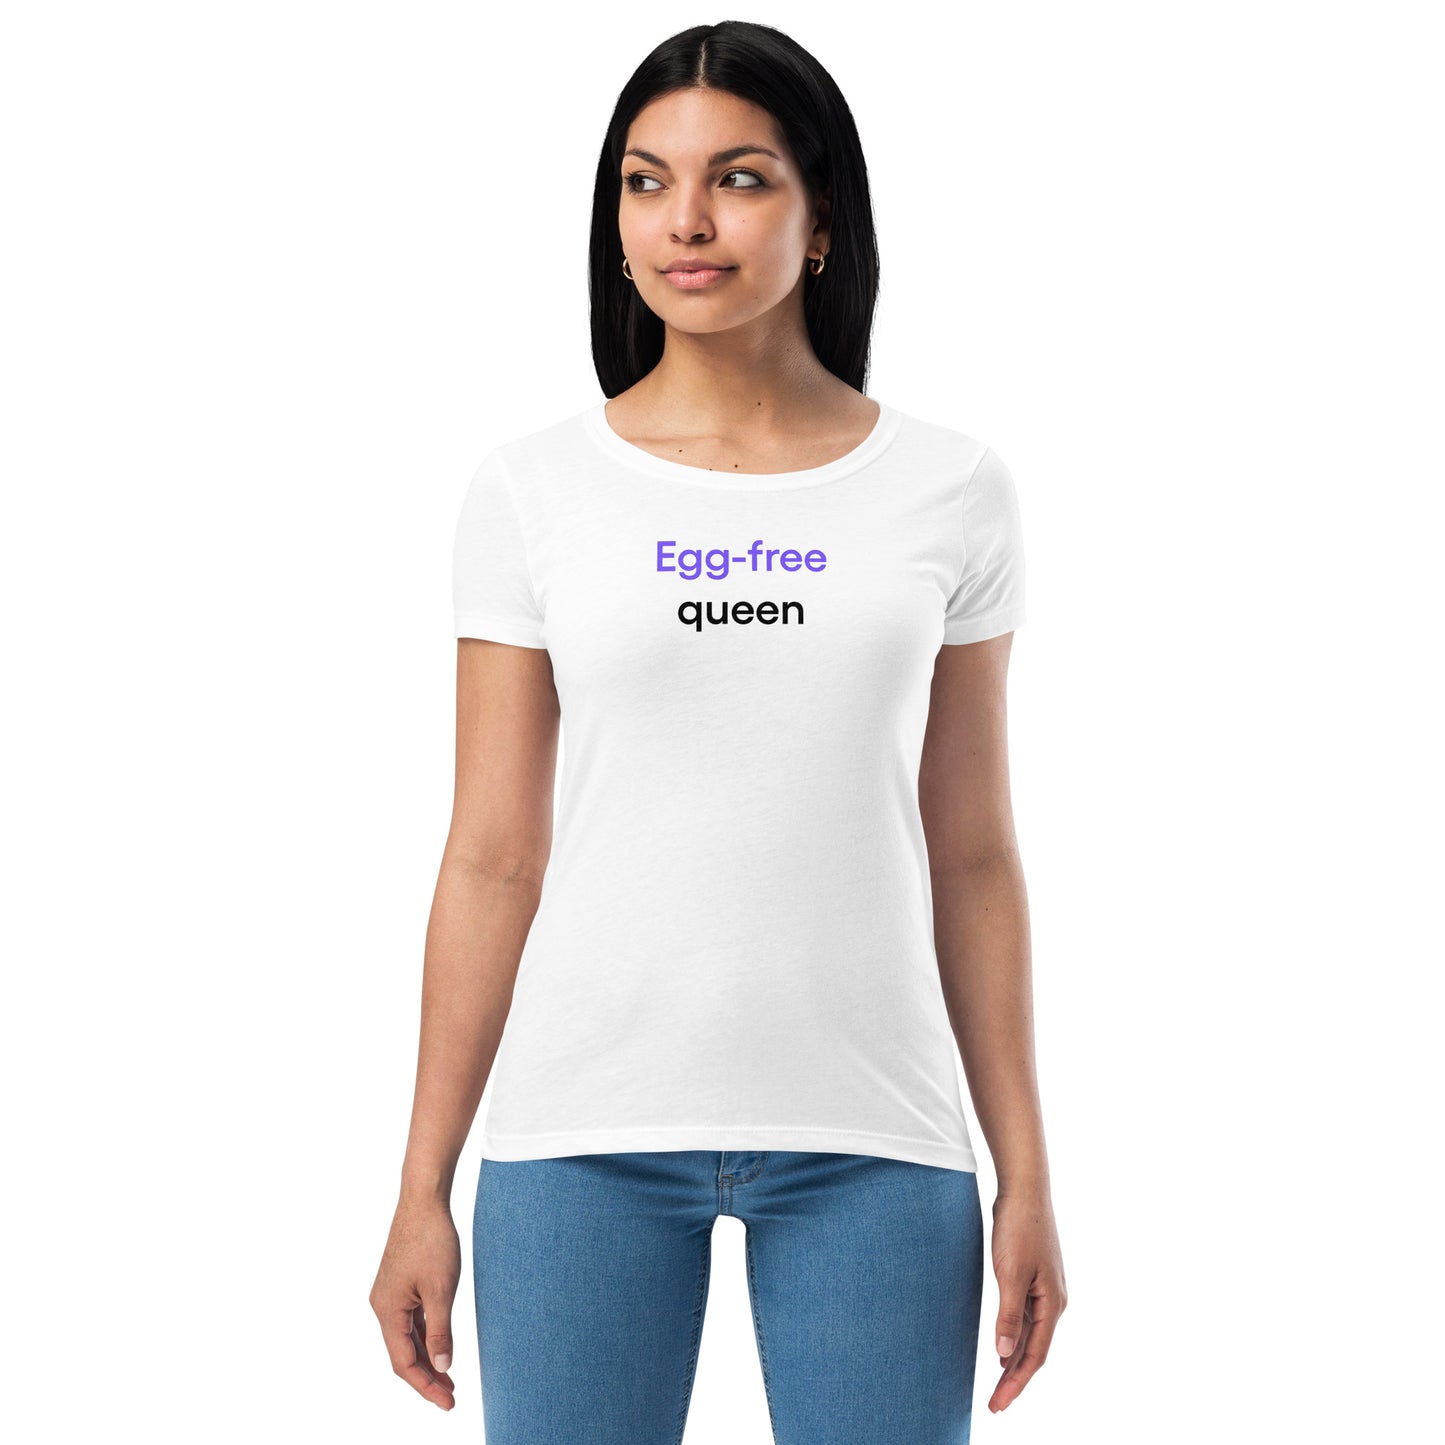 Egg-free queen | Women’s fitted t-shirt